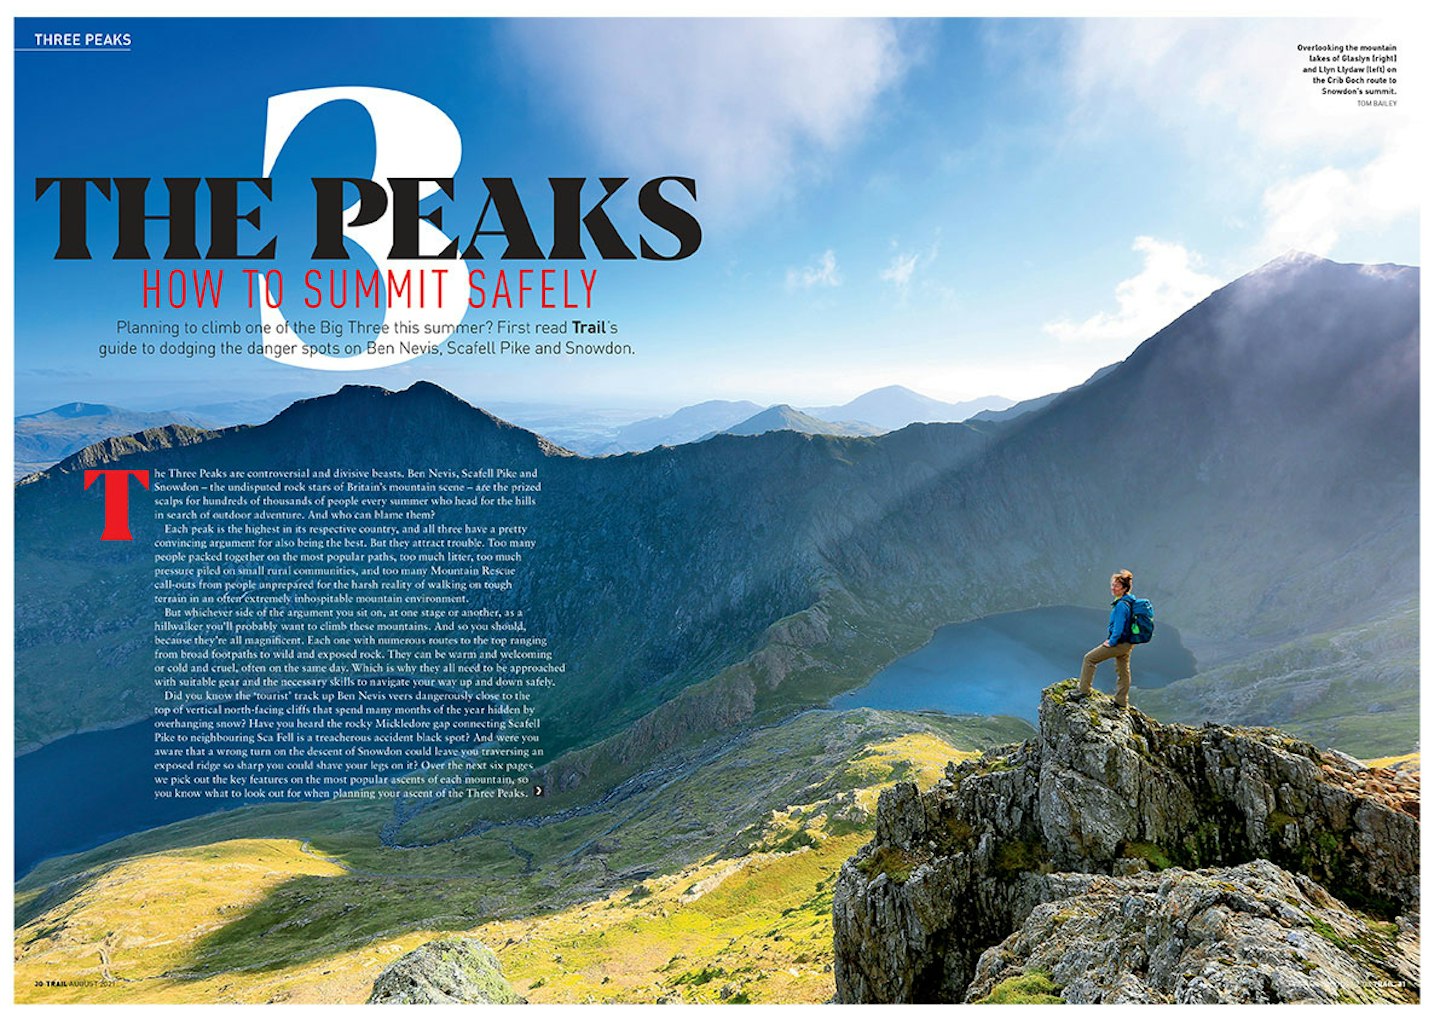 The 3 Peaks - how to summit safely